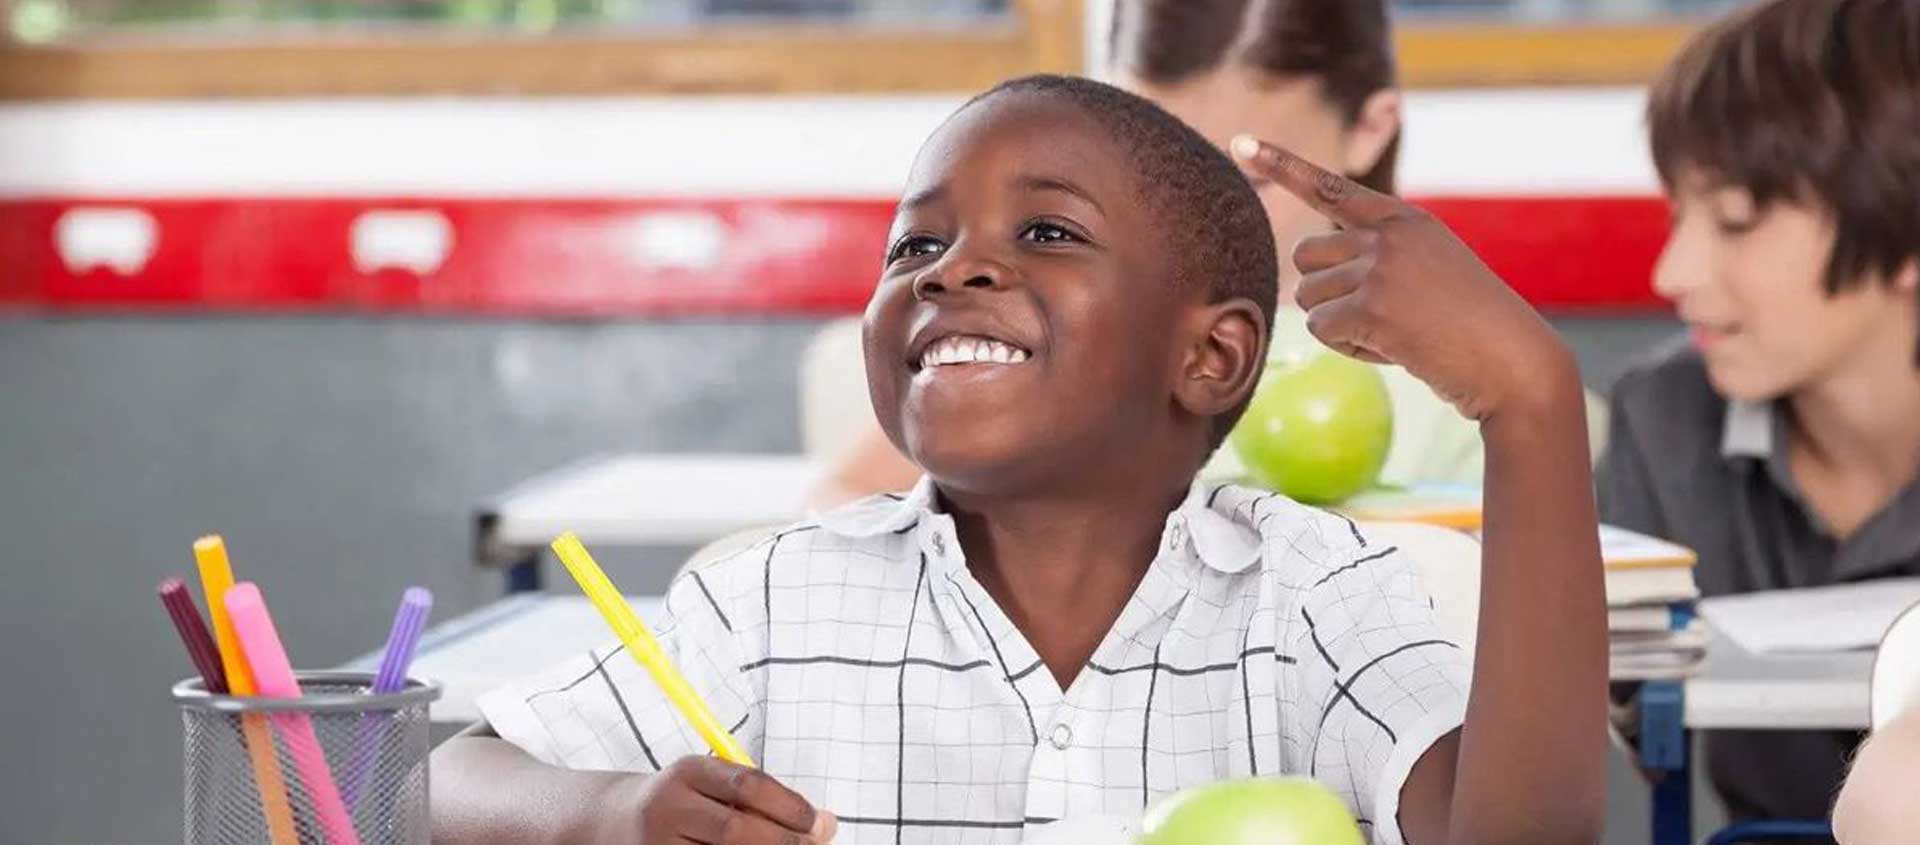 A Black American boy at a desck in school. He is smiling.